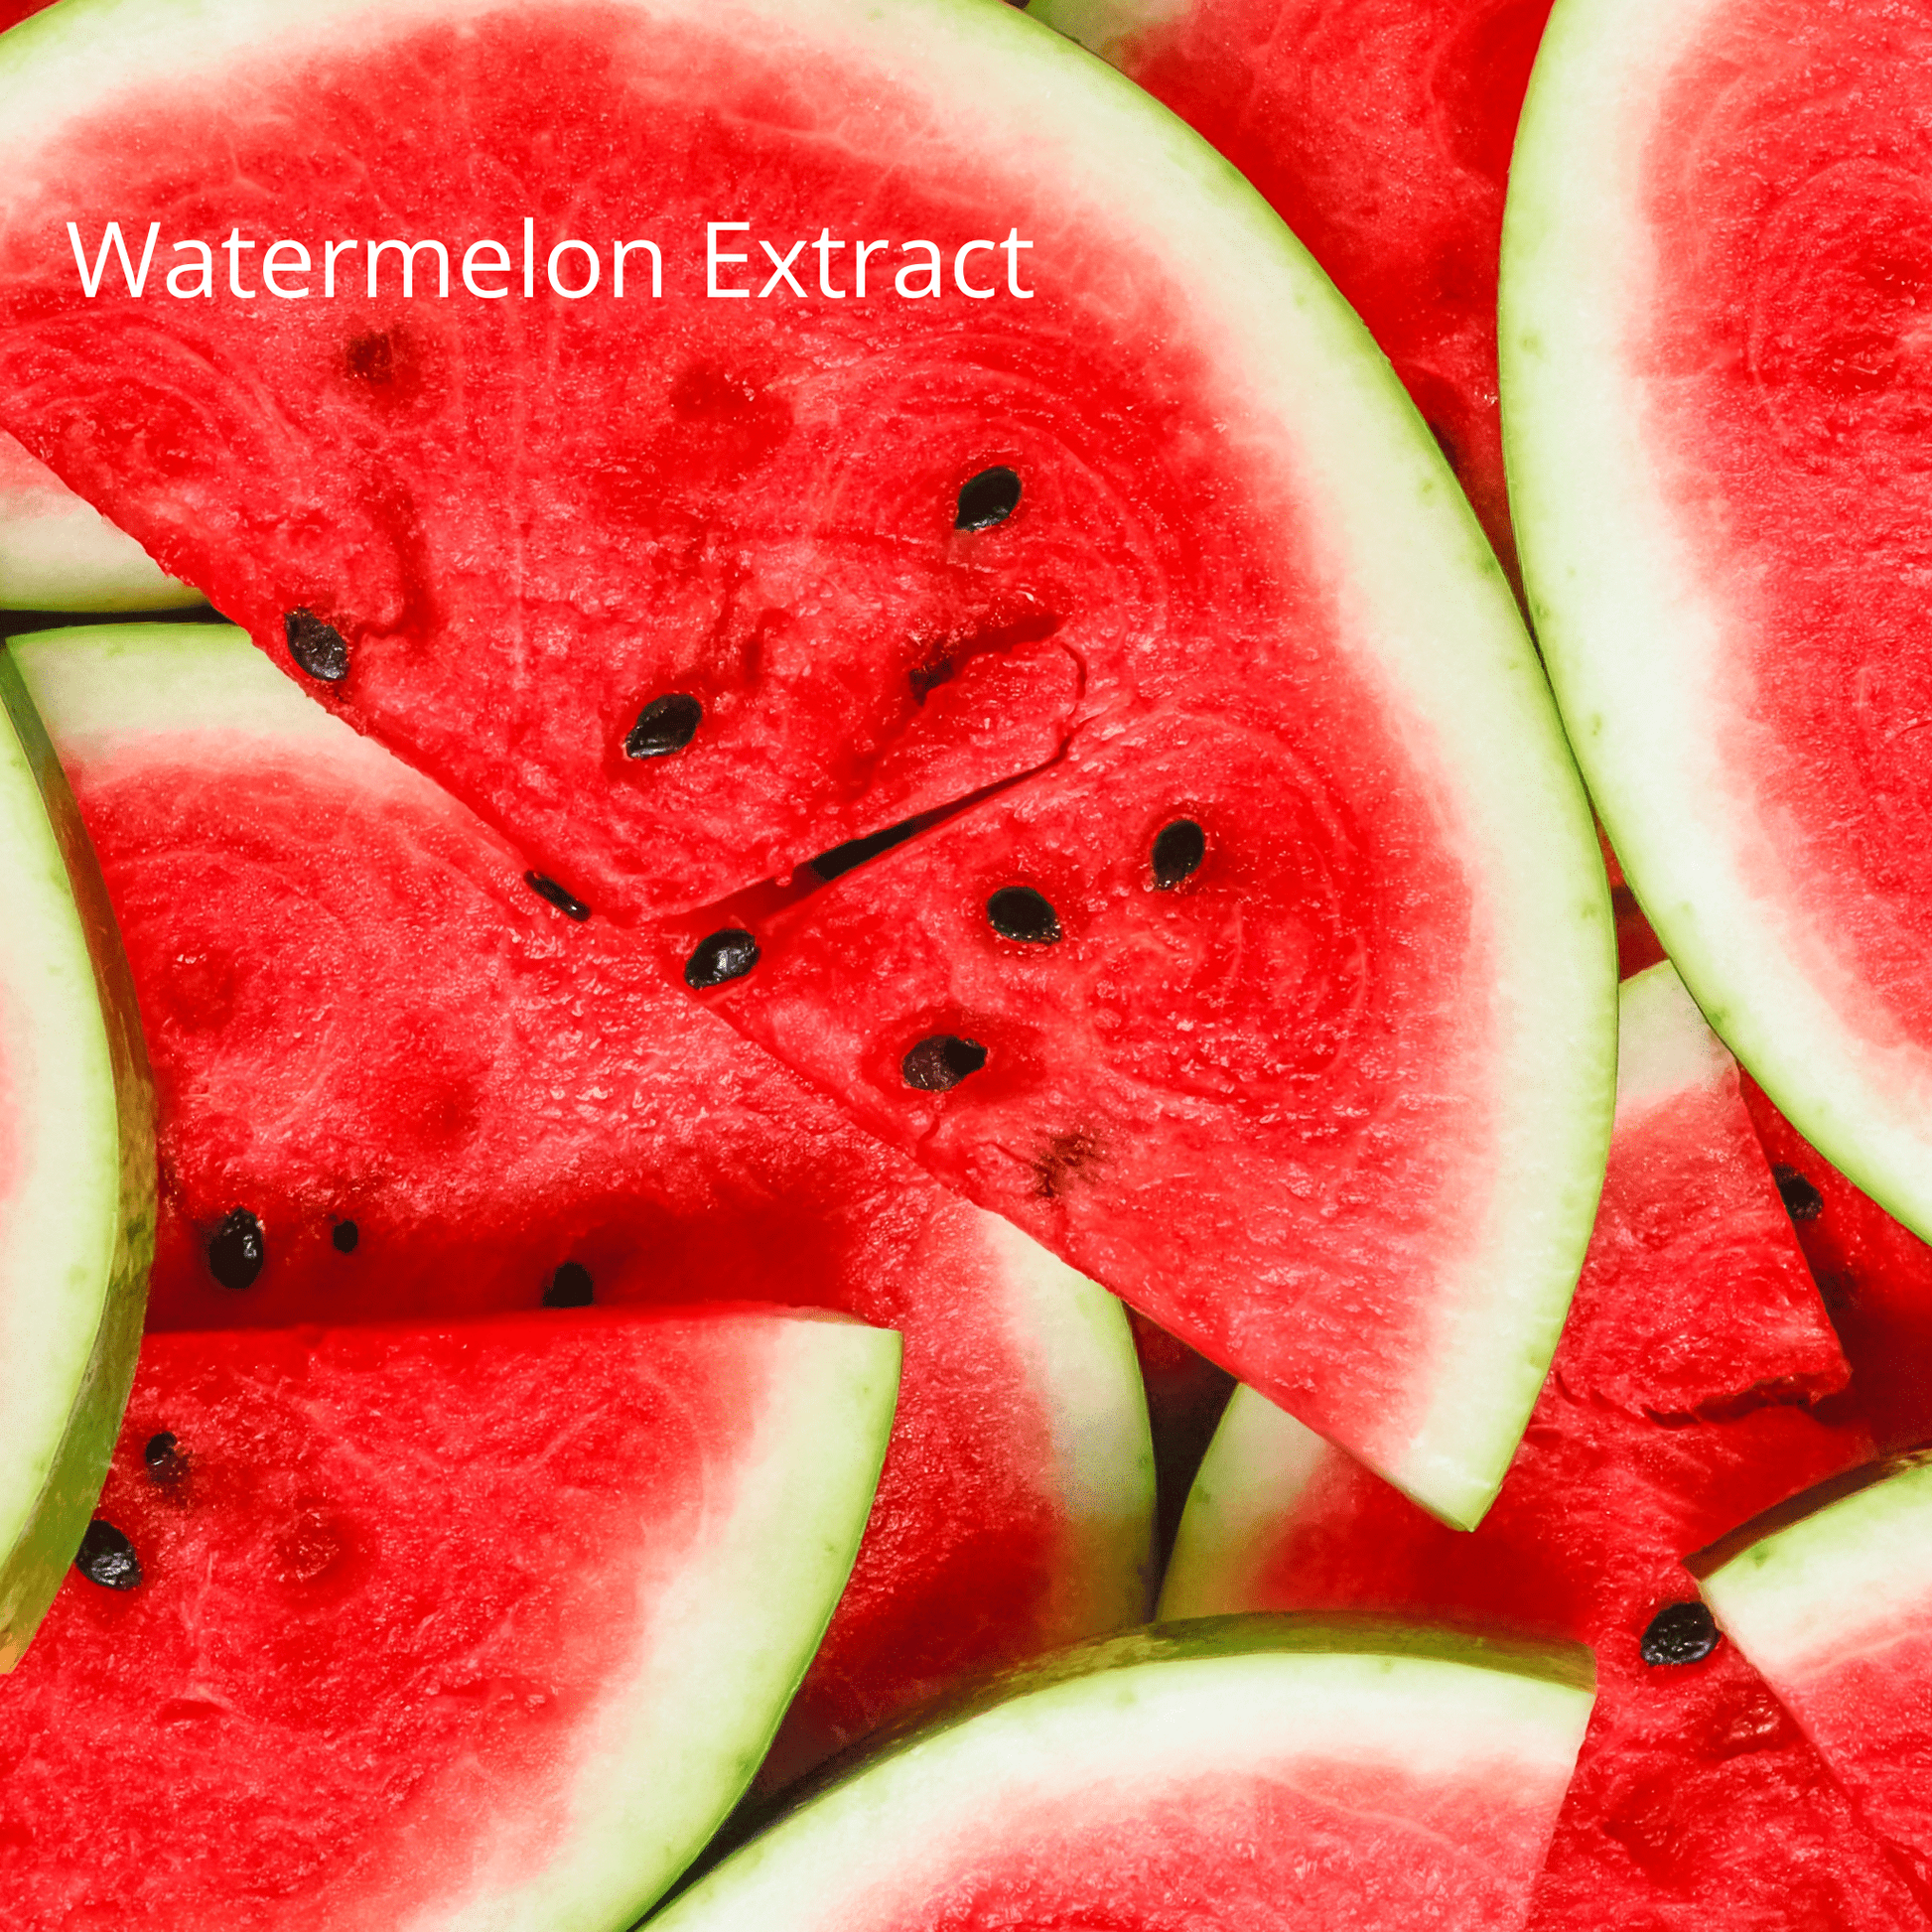 watermelon extract in Be Green Bath and Body Cucumber + Watermelon Toner